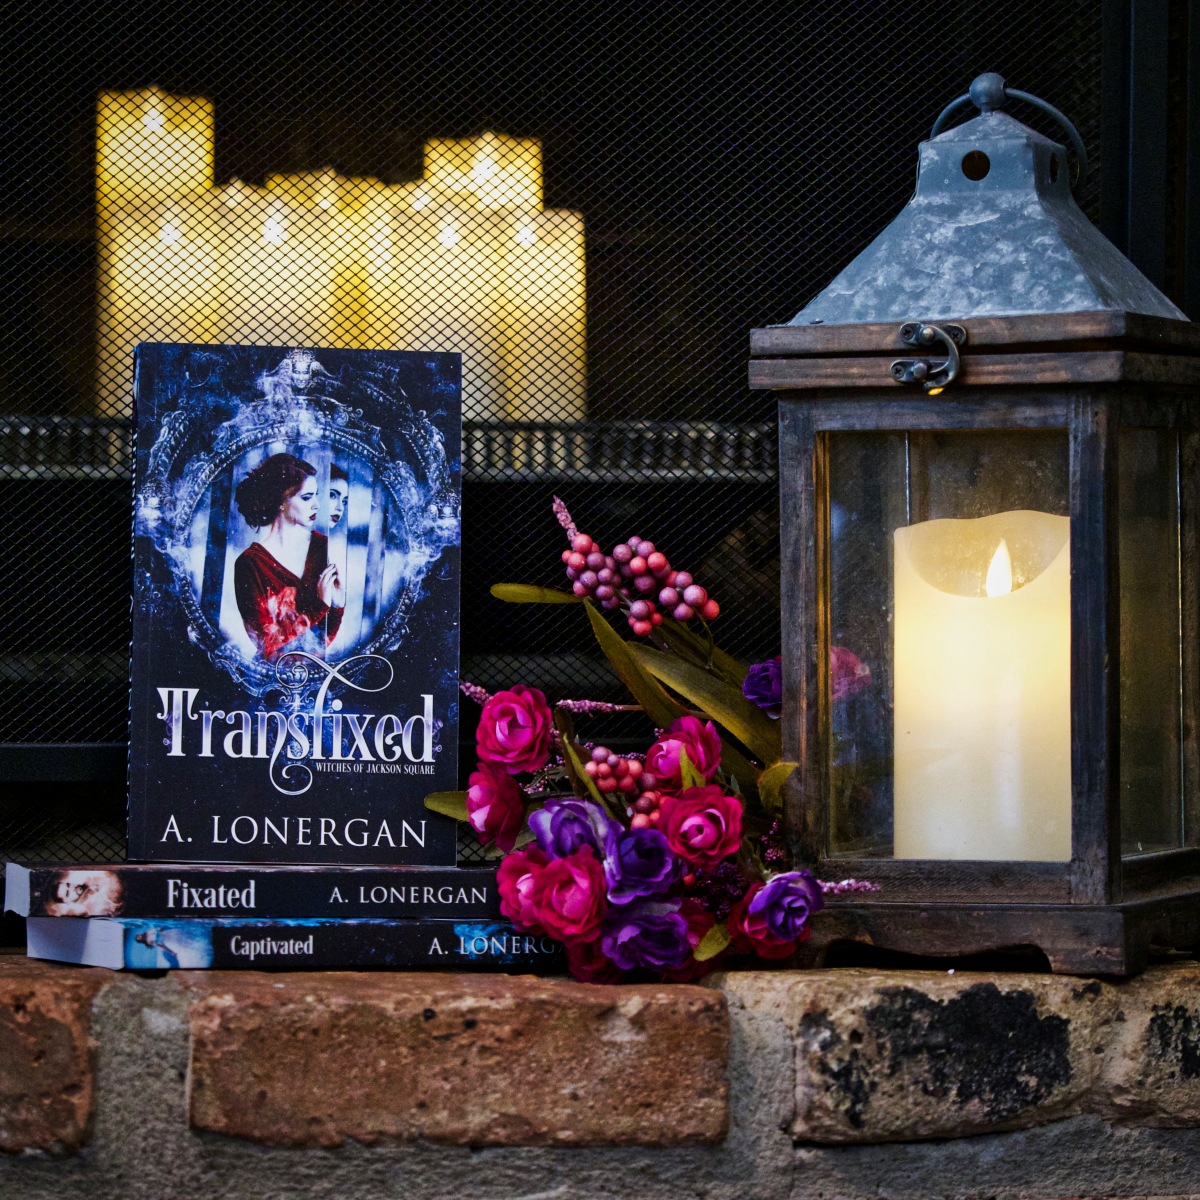 A. Lonergan – Transfixed (Witches of Jackson Square Book One)